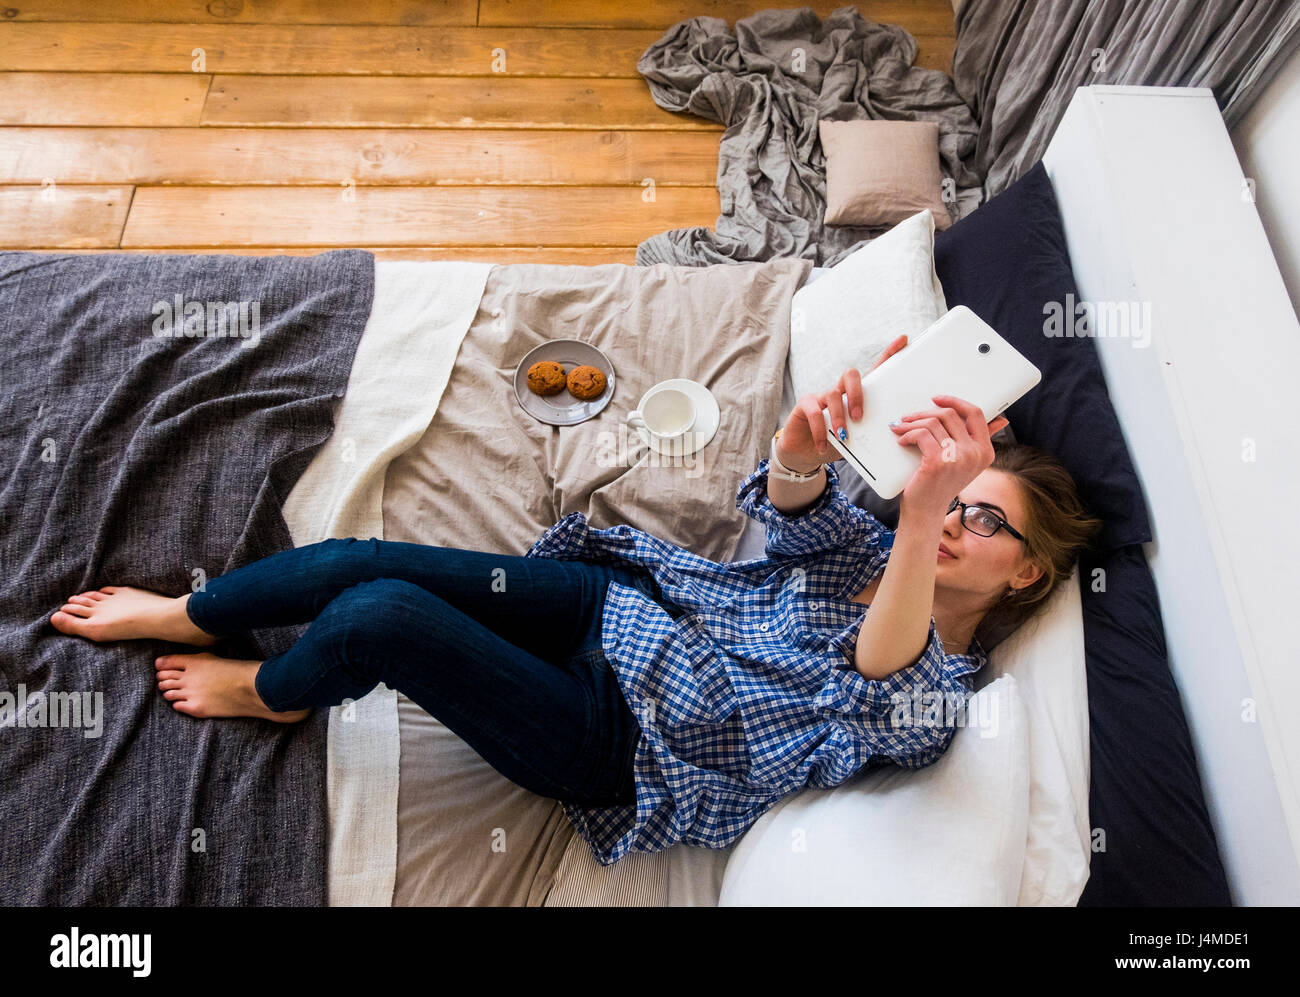 Caucasian woman laying on bed posing for selfie with digital tablet Stock Photo